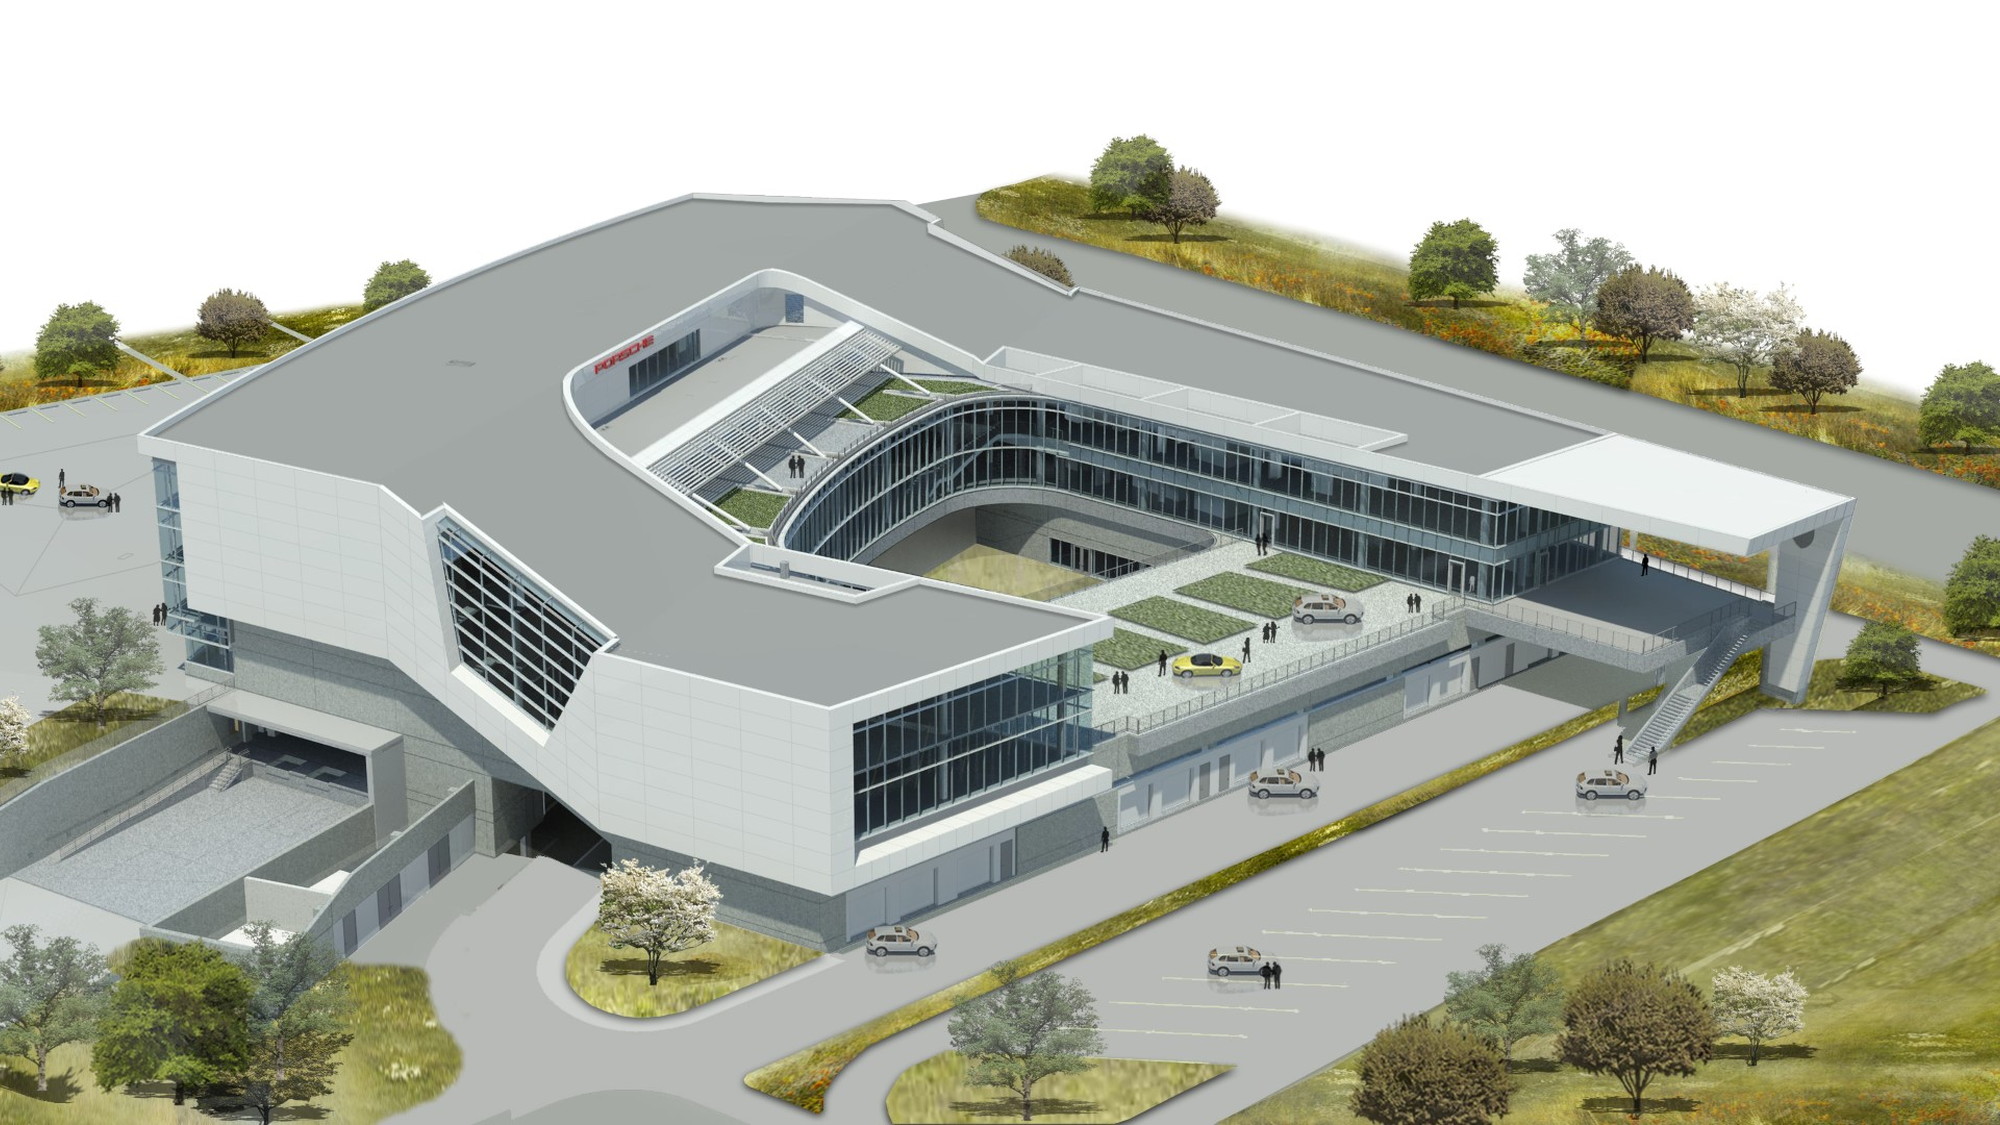 Porsche U.S. headquarters, expected completion by end of 2014